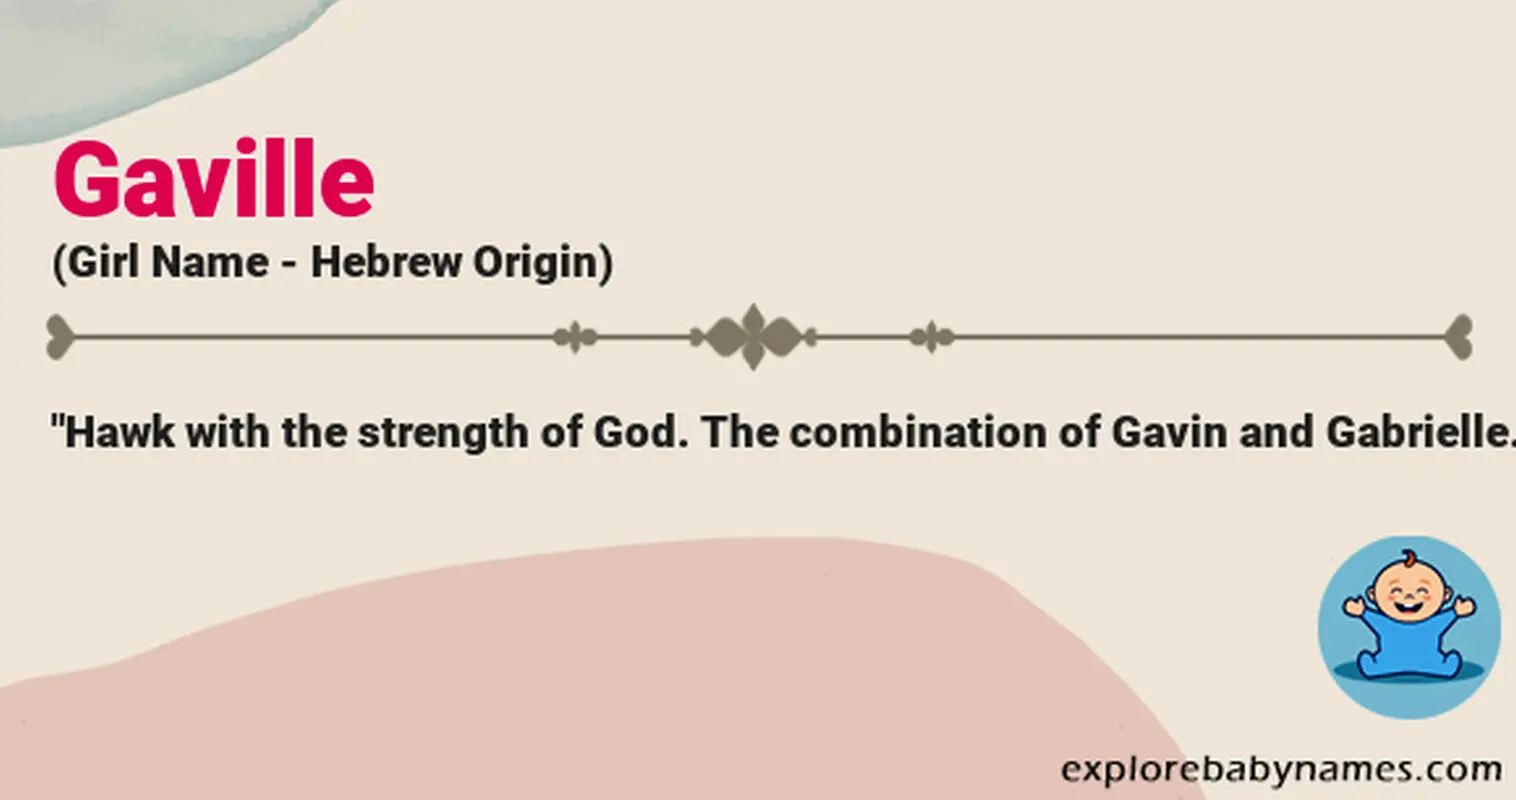 Meaning of Gaville